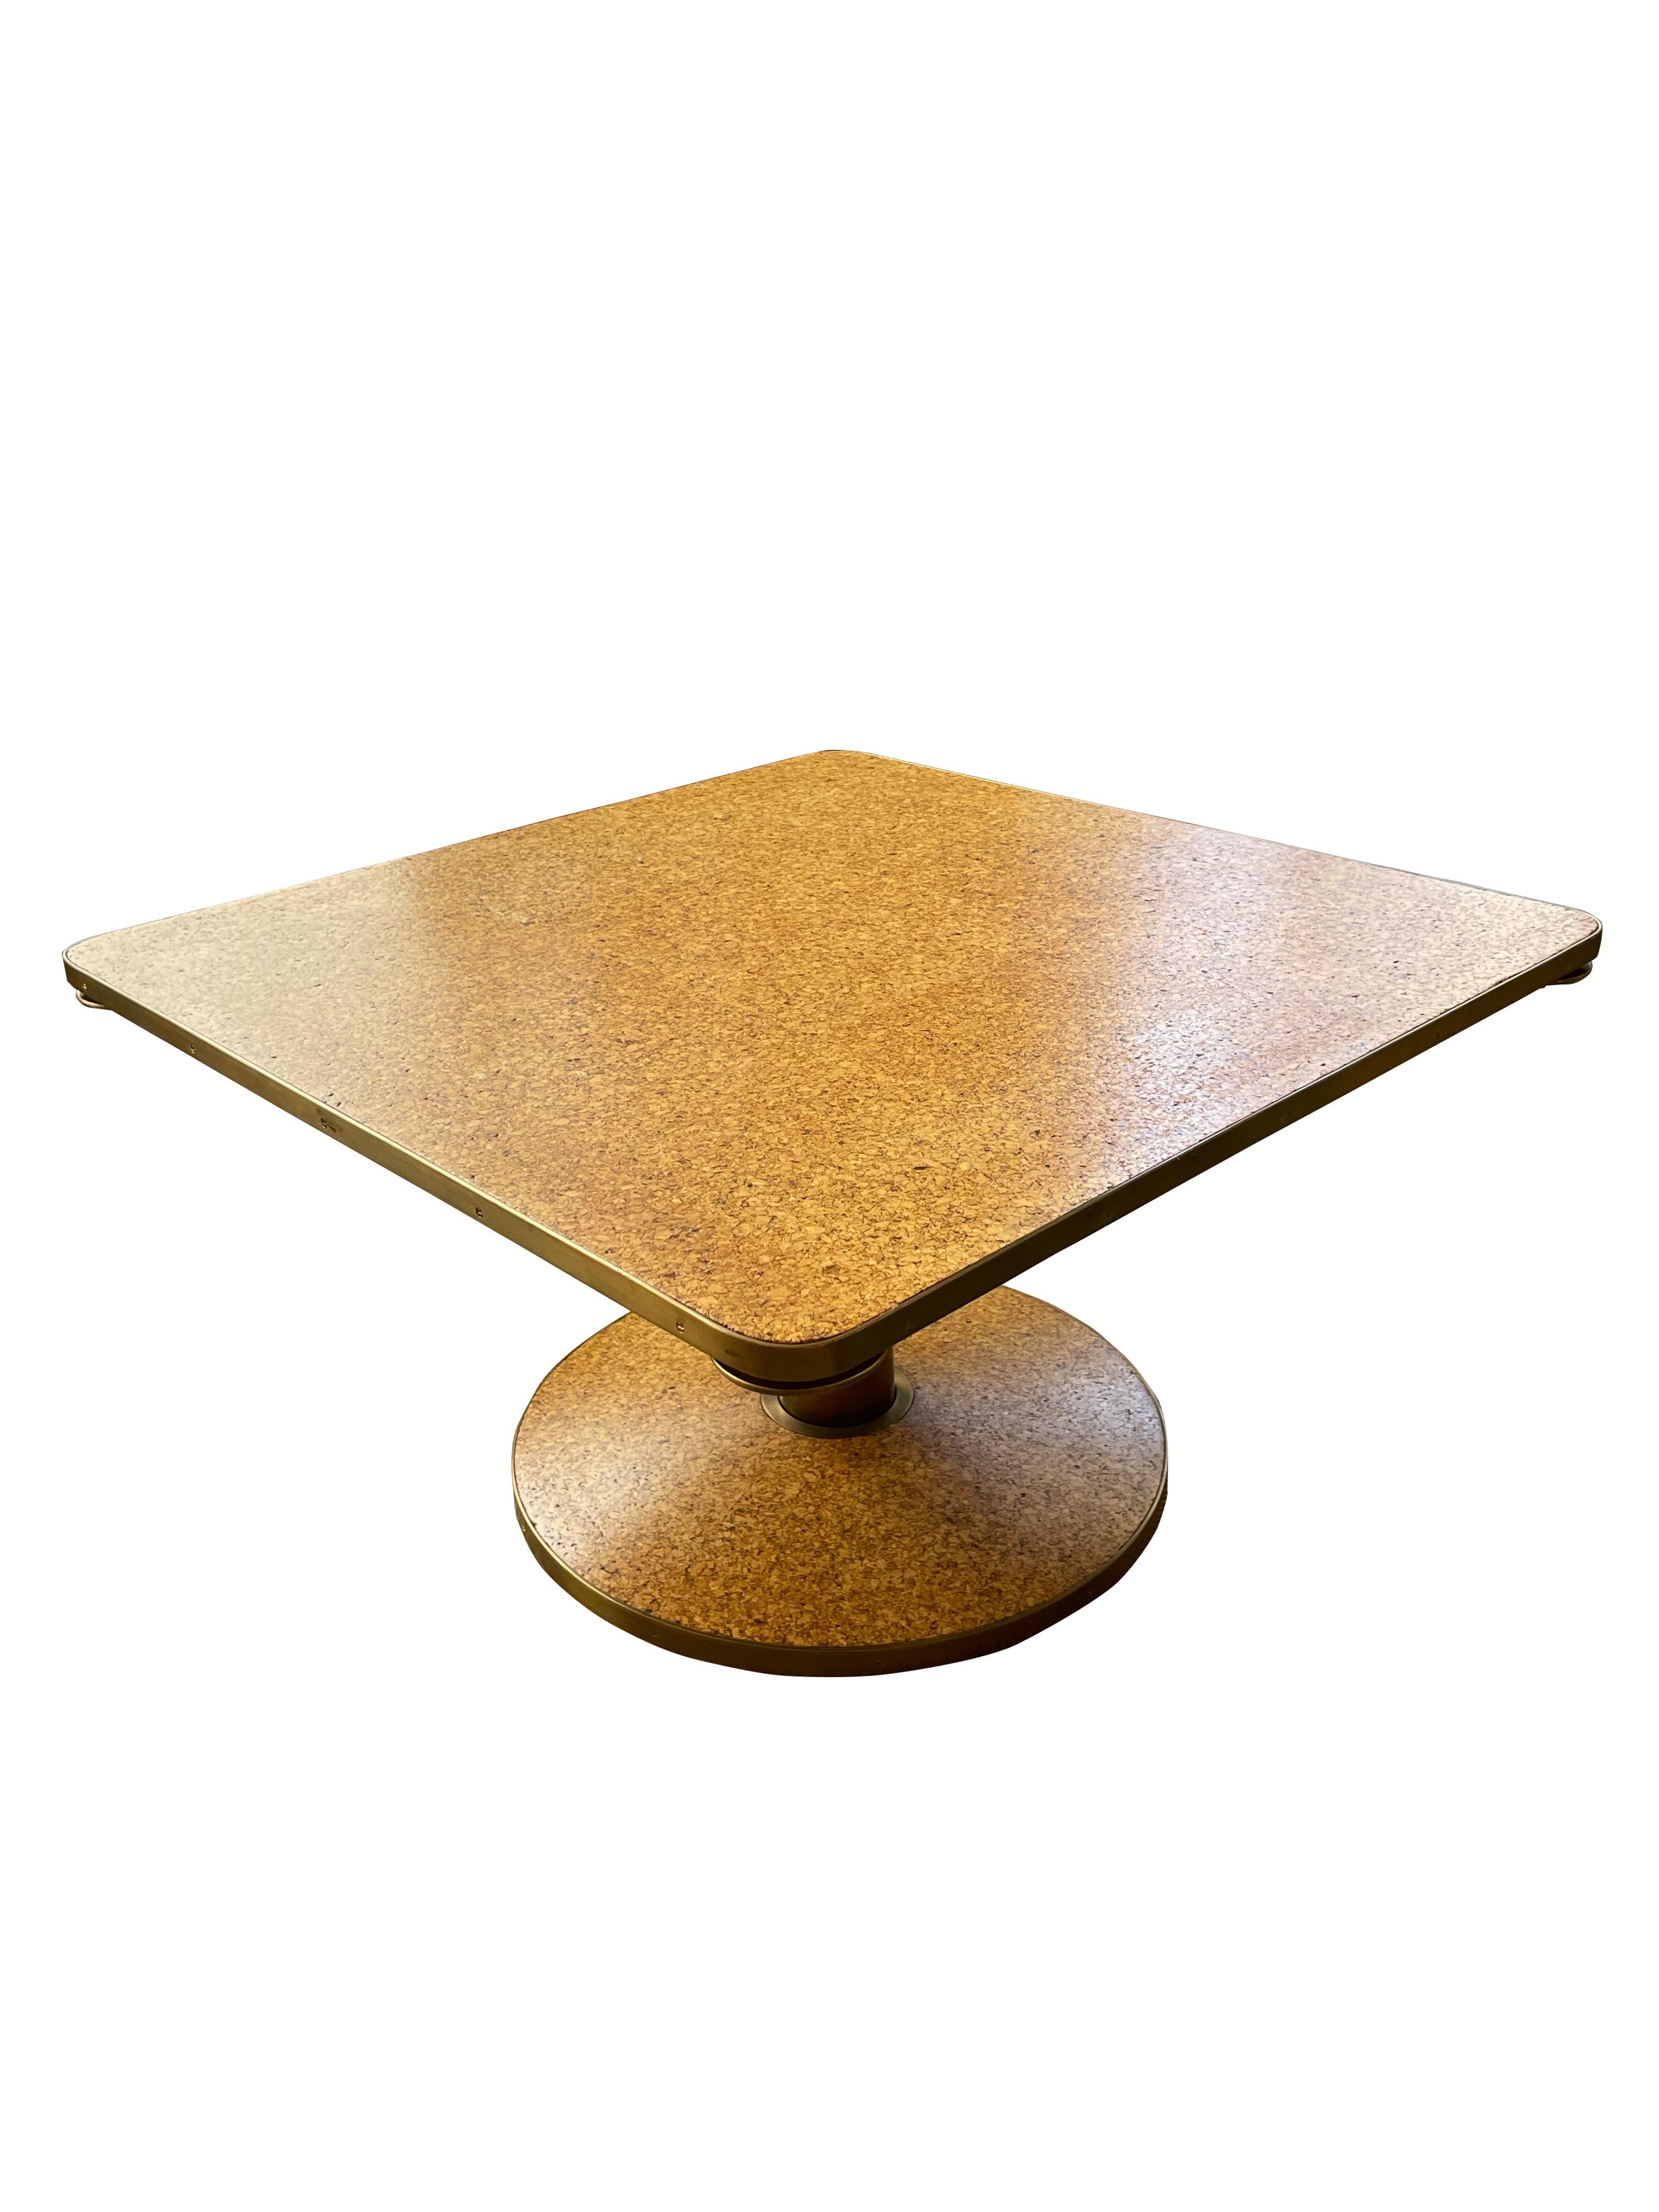 An exquisite Cork Top Game Table, a remarkable piece of mid-century design crafted in the 1950s. Designed by the renowned Edward Wormley and manufactured by Dunbar, this table combines functionality, versatility, and timeless aesthetics. The table